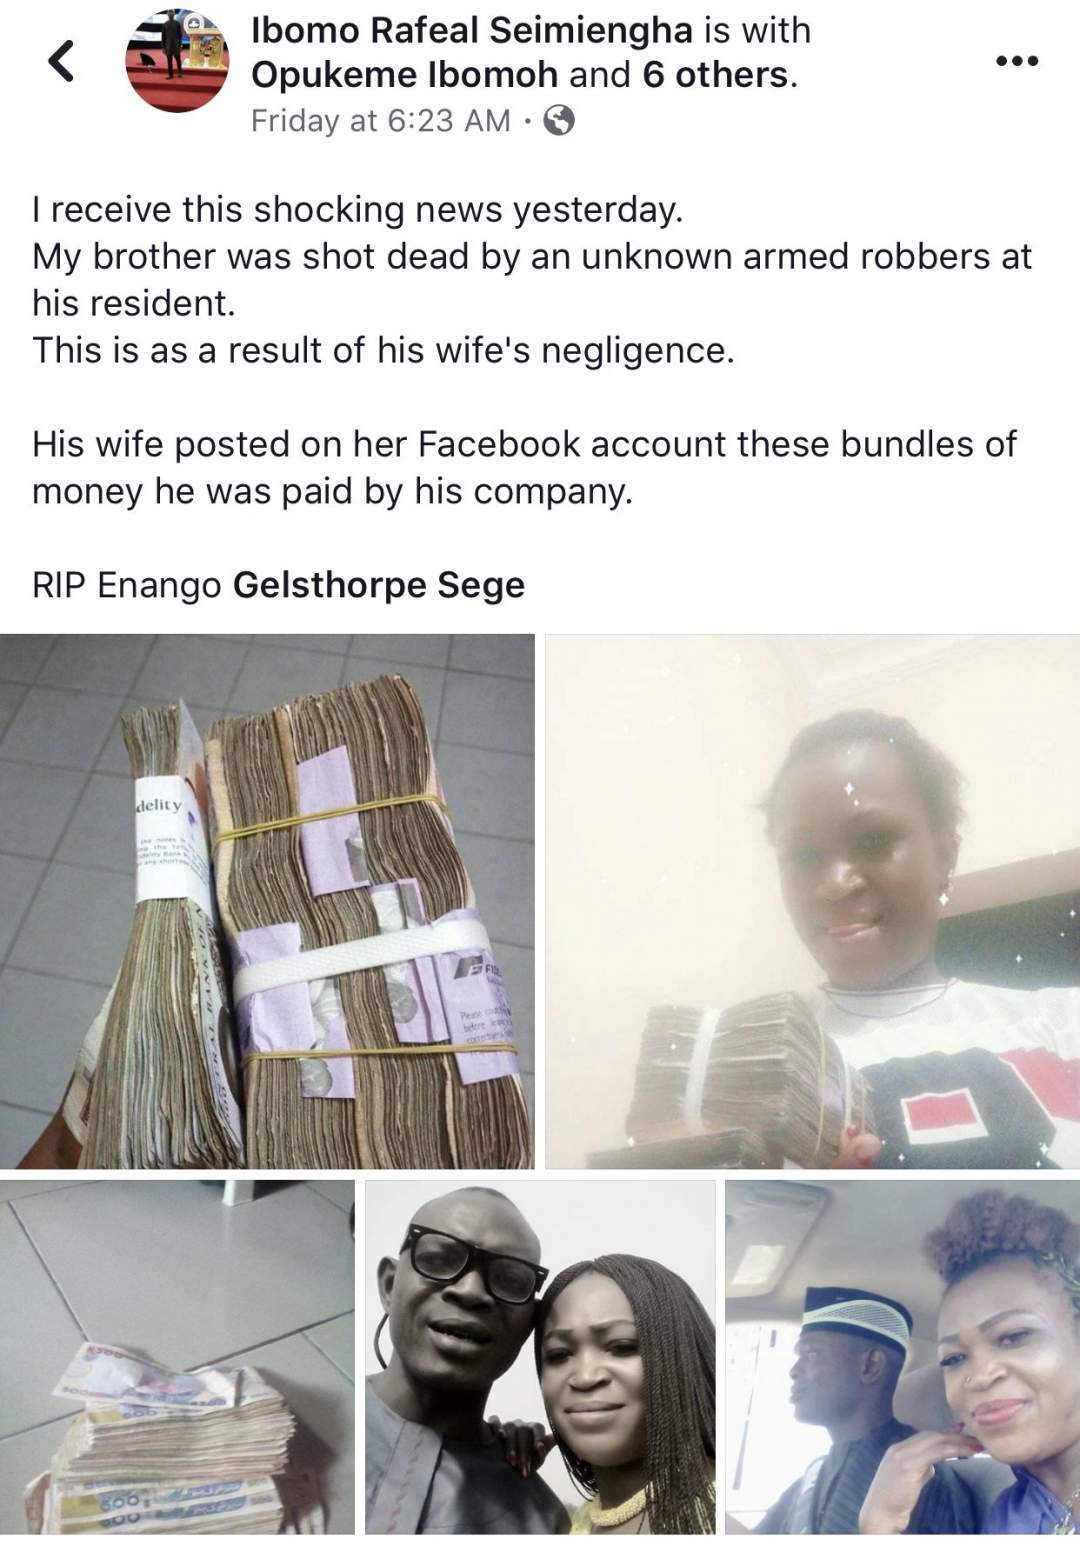 Nigerian man shot dead by armed robbers after his non-cautious wife flaunted cash on Facebook